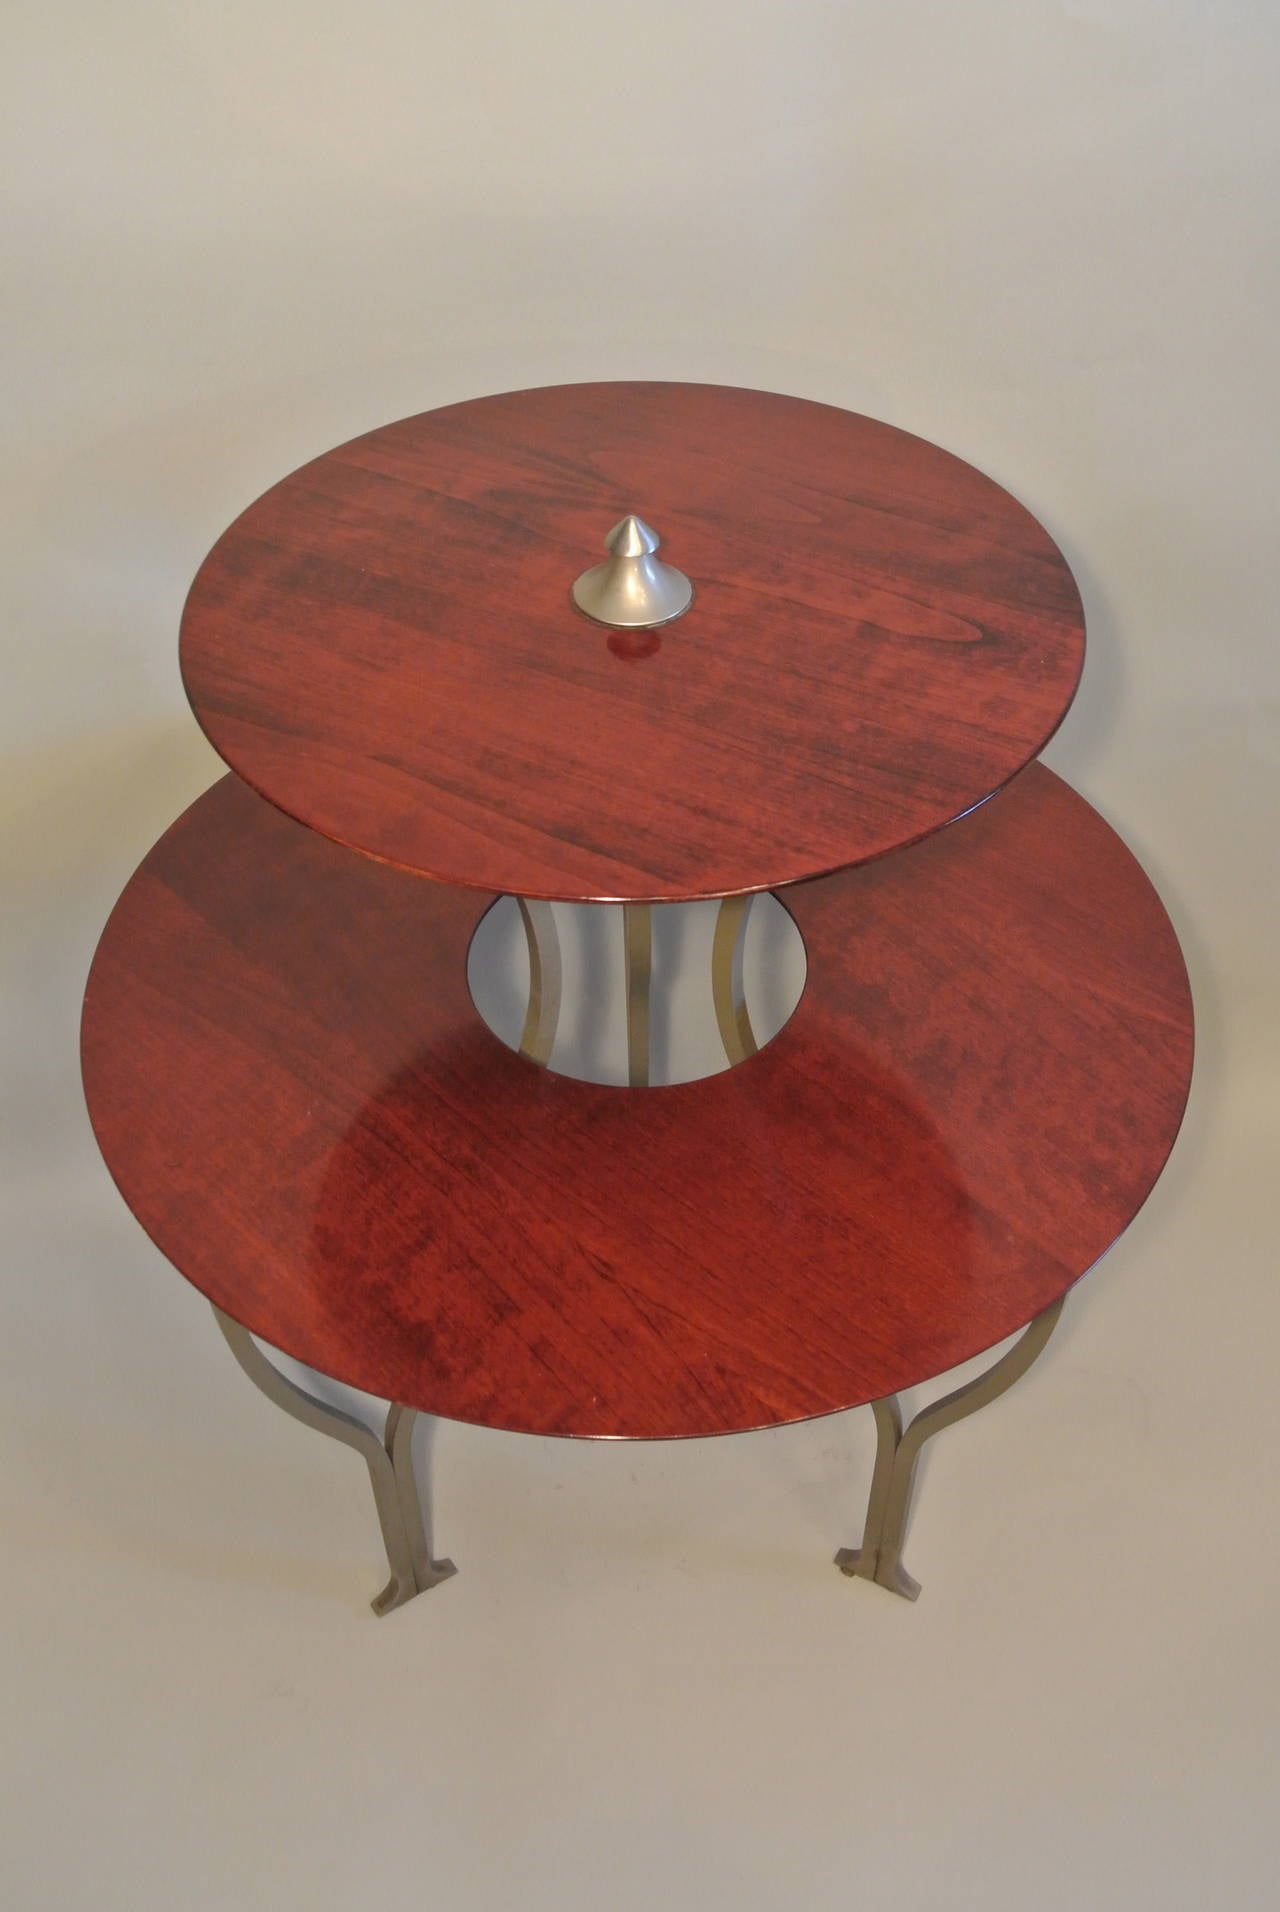 Painted Bi-Level Round Table in Solid Mahogany